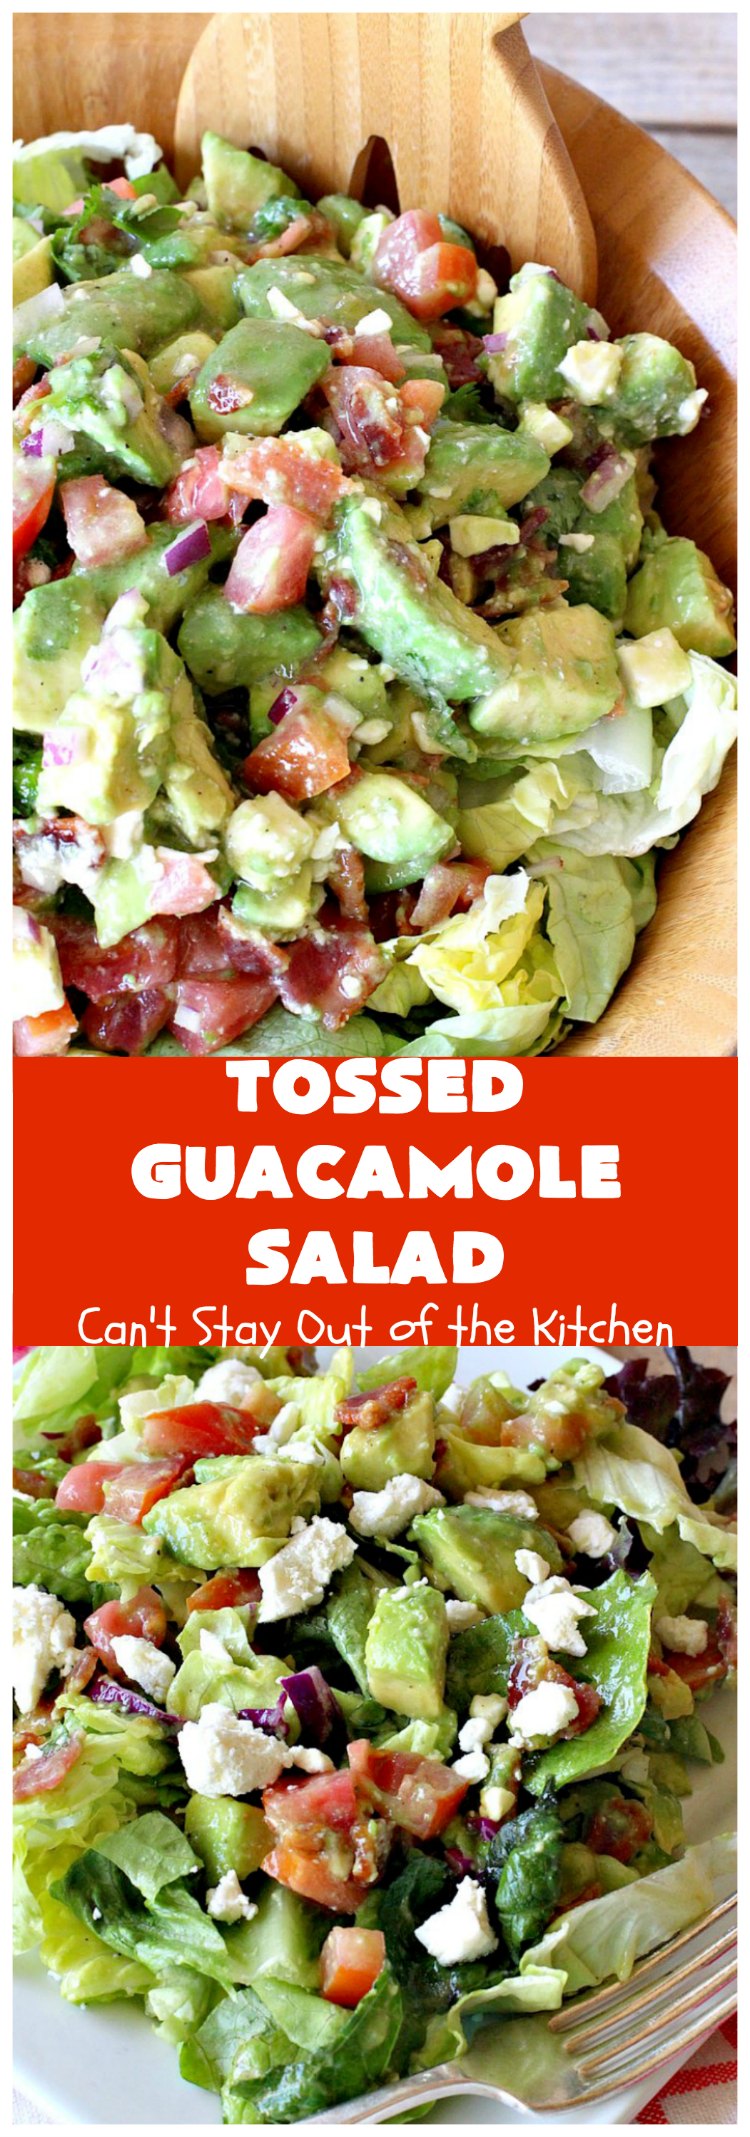 Tossed Guacamole Salad | Can't Stay Out of the Kitchen